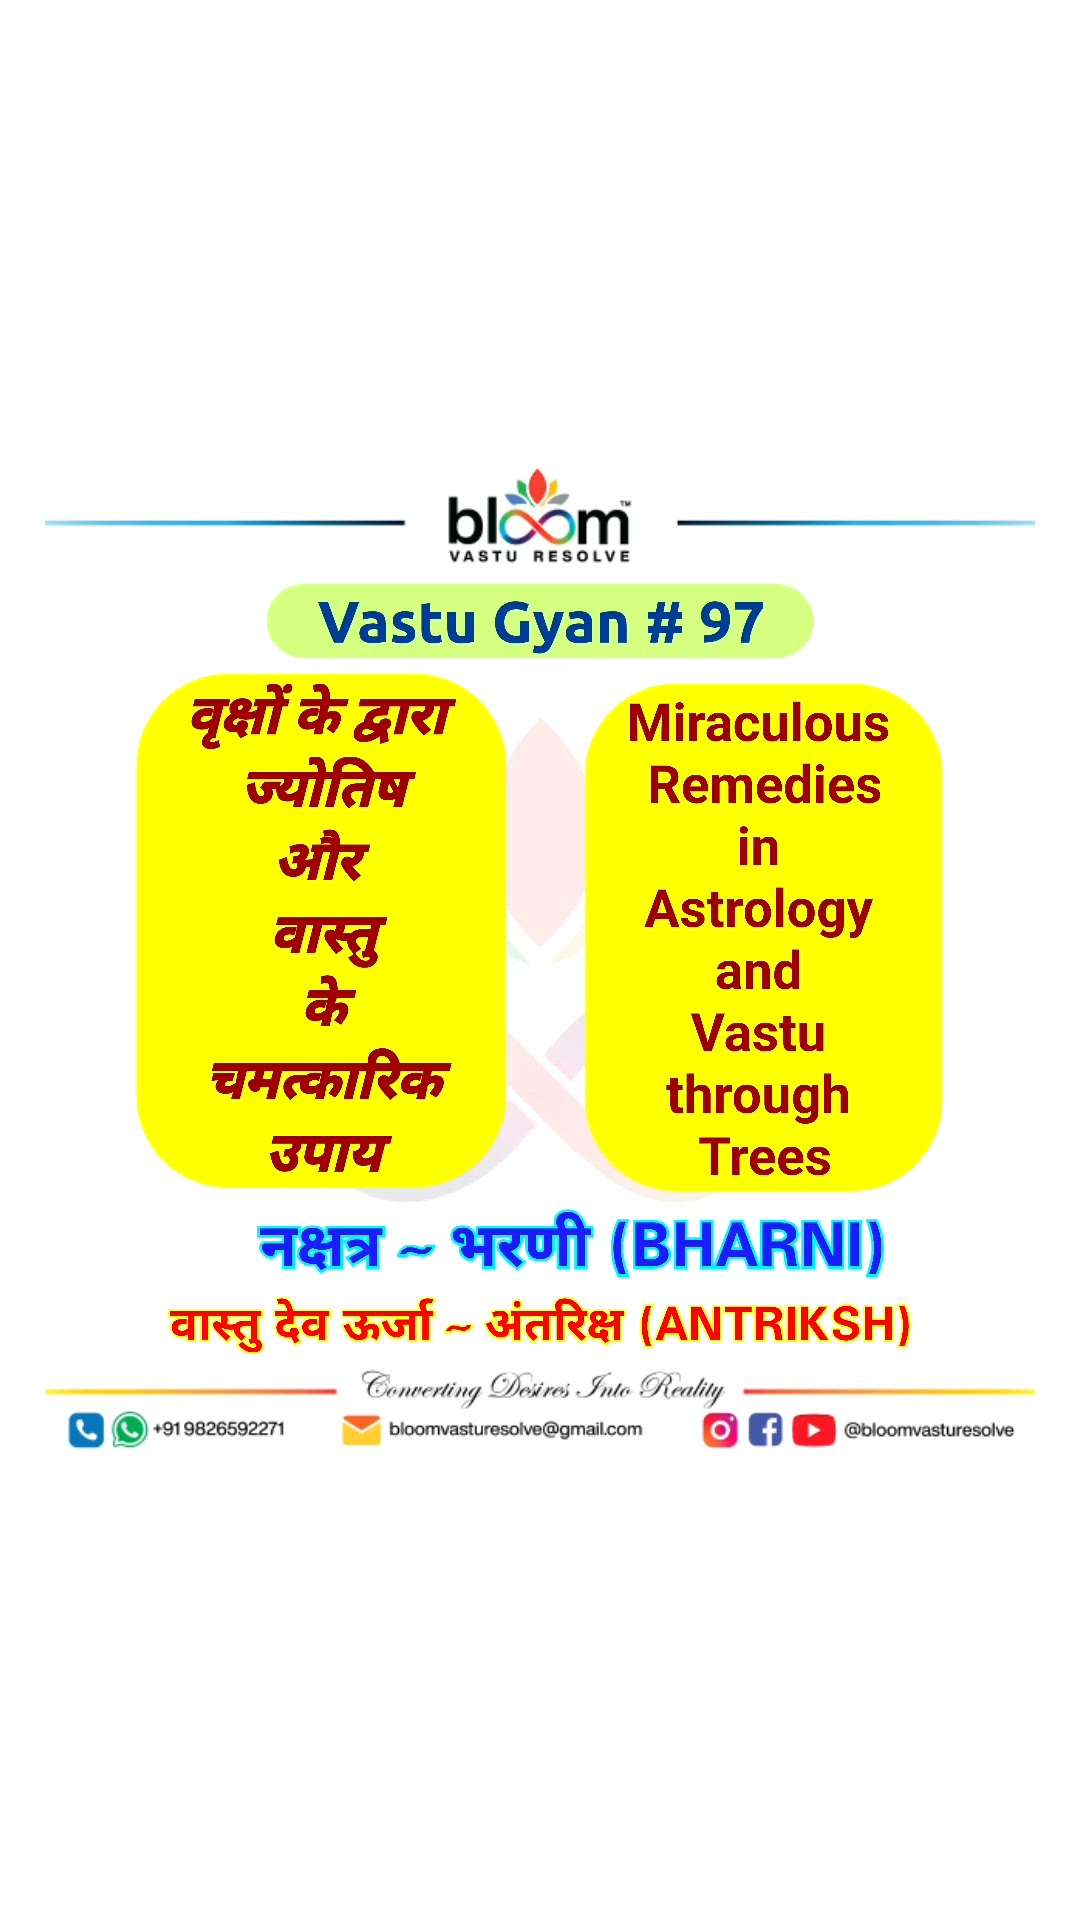 Which Nakshatra tree do you want to know, kindly write in the comment box.

For more Vastu please follow @bloomvasturesolve
on YouTube, Instagram & Facebook
.
.
For personal consultation, feel free to contact certified MahaVastu Expert through
M - 9826592271
Or
bloomvasturesolve@gmail.com

#vastu 
#mahavastu 
#mahavastuexpert
#bloomvasturesolve
#BirthConstellationTree
#vasturemedies
#astrovastu
#astrology
#DivineEnergyRemedy
#Sacredtree
#bharni
#antriksh
#आँवला
#indiangooseberry